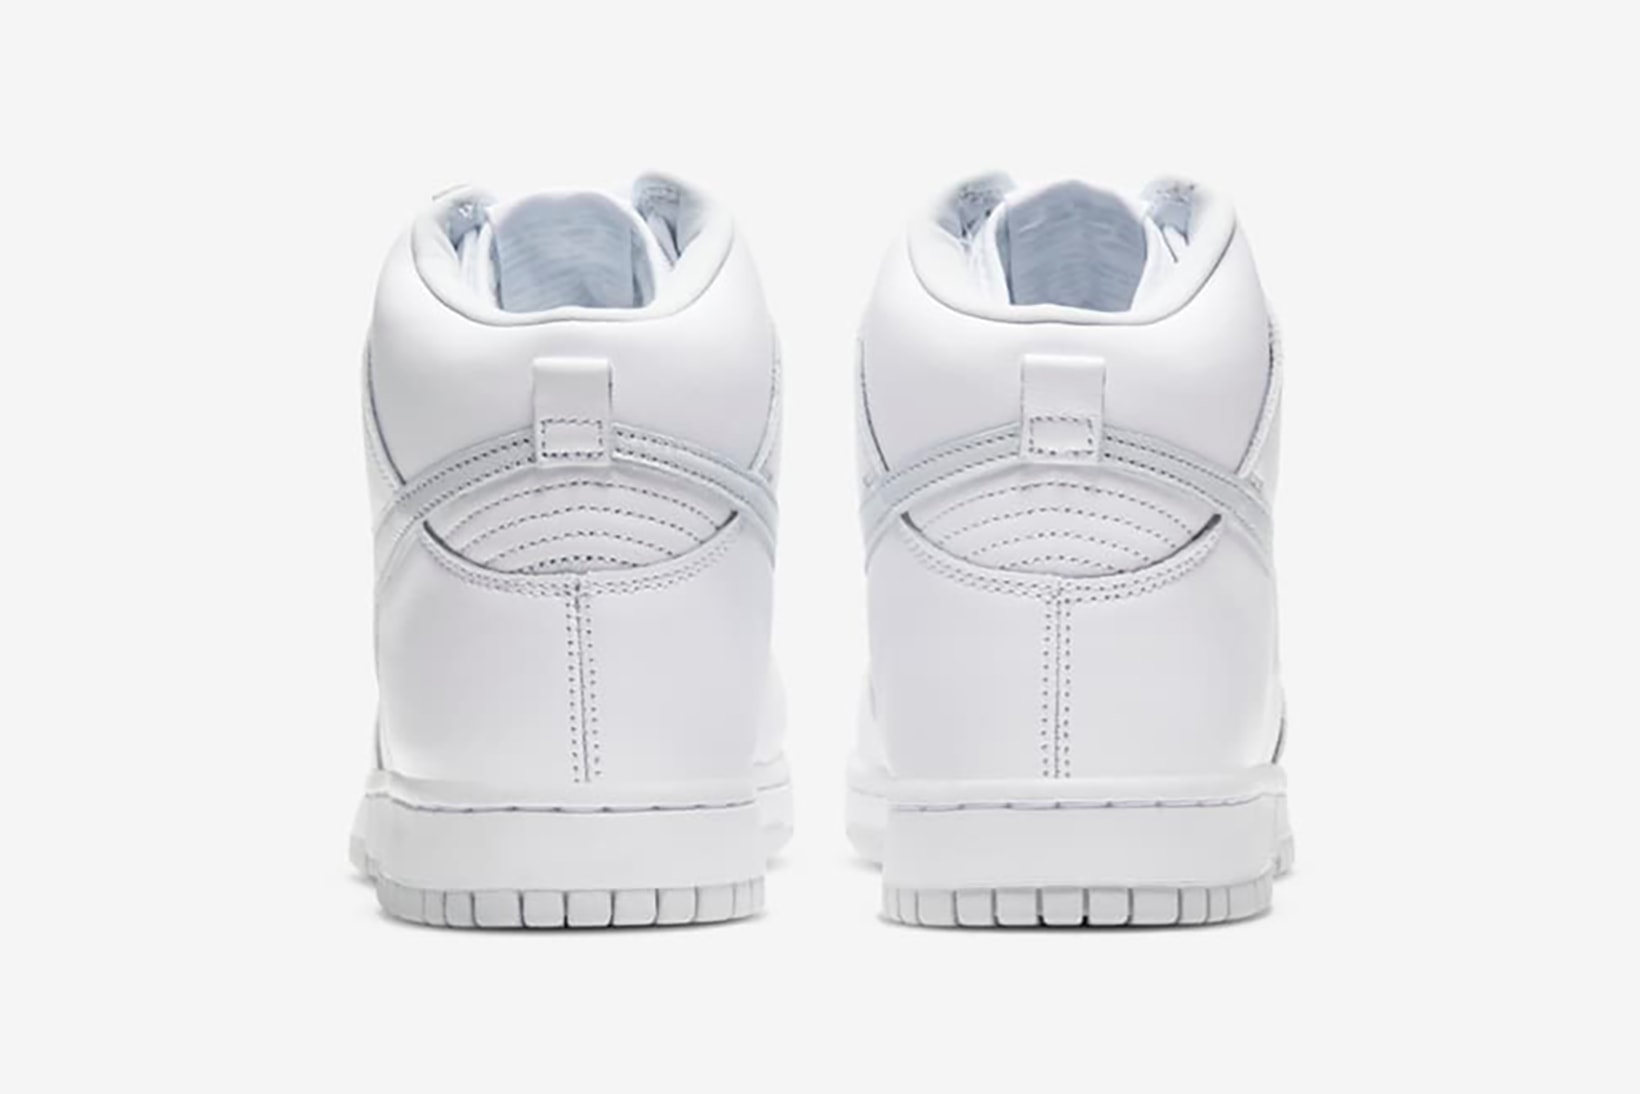 nike dunk high sneakers white silver gray pure platinum colorway sneakerhead footwear shoes